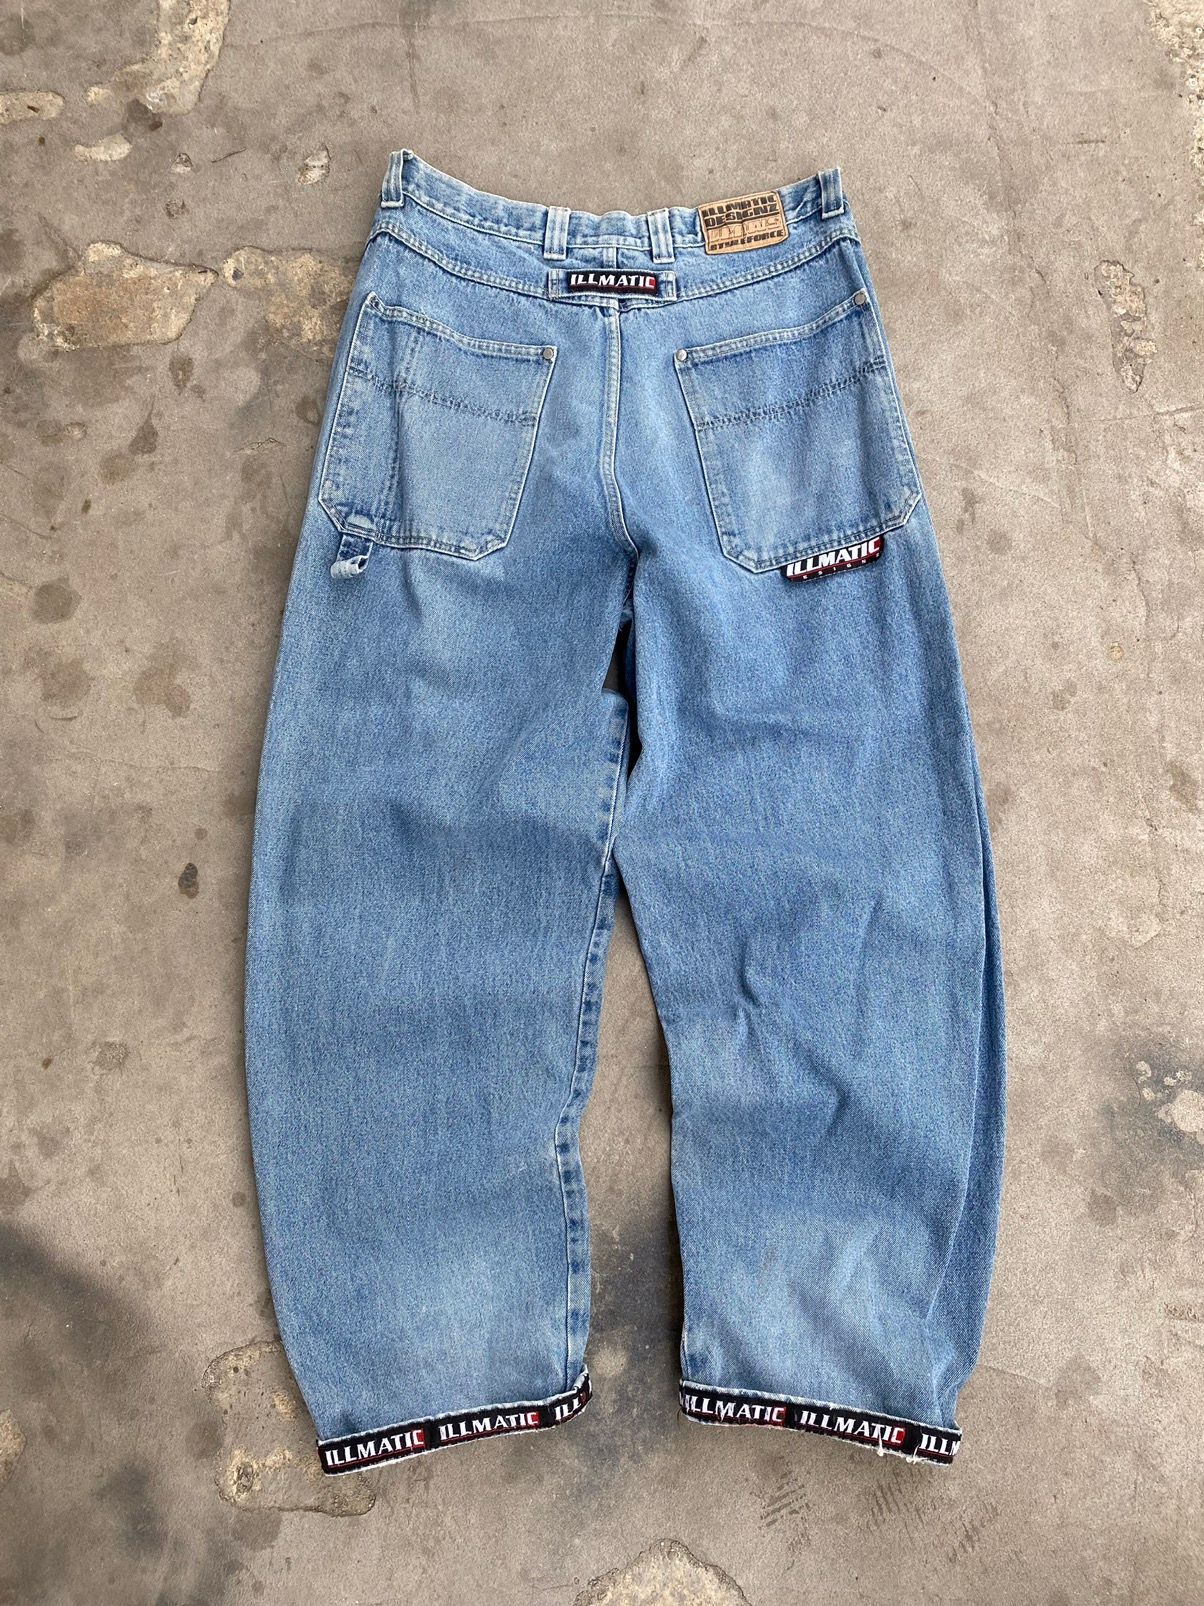 Vintage Vintage Illmatic Rave Baggy Jeans JNCO Style | Grailed